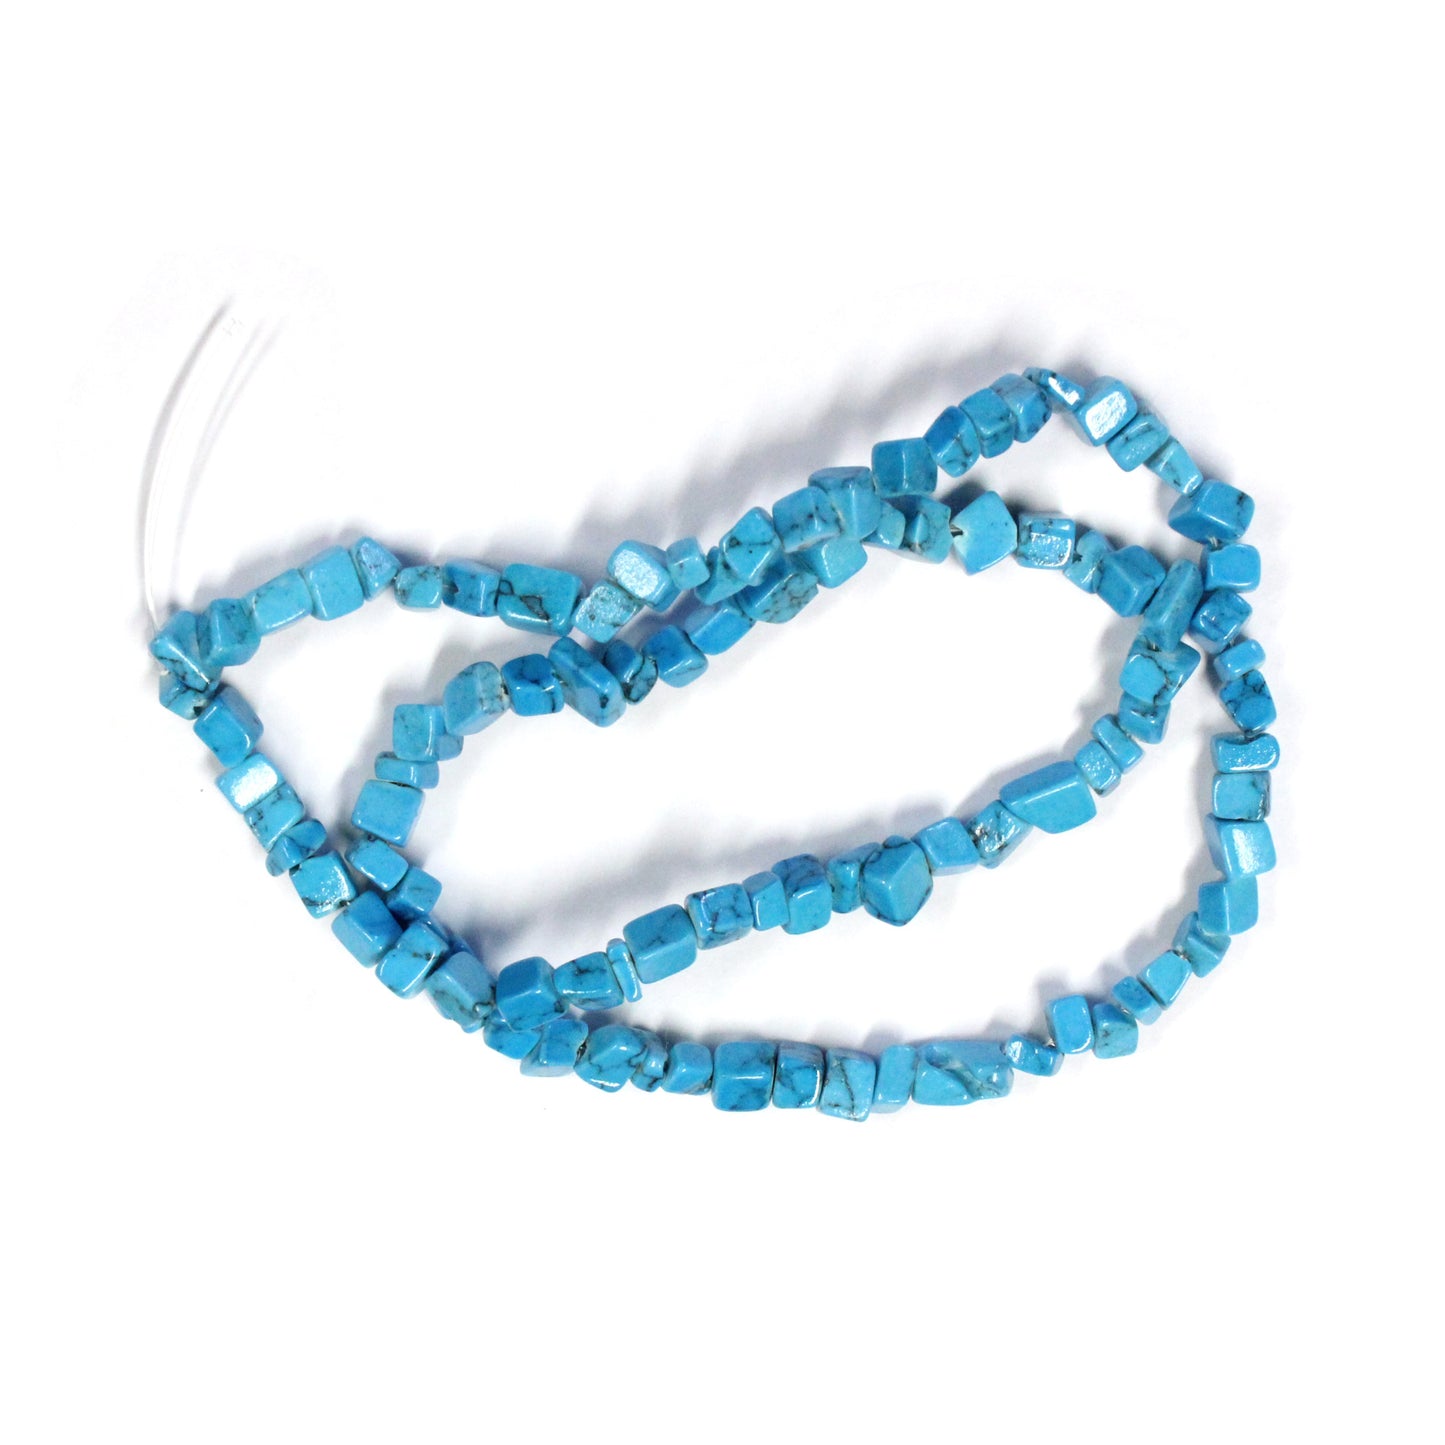 Blue Turquoise Chip Beads / 16 Inch strand / 4-8mm chips / man-made opaque glossy polished stone